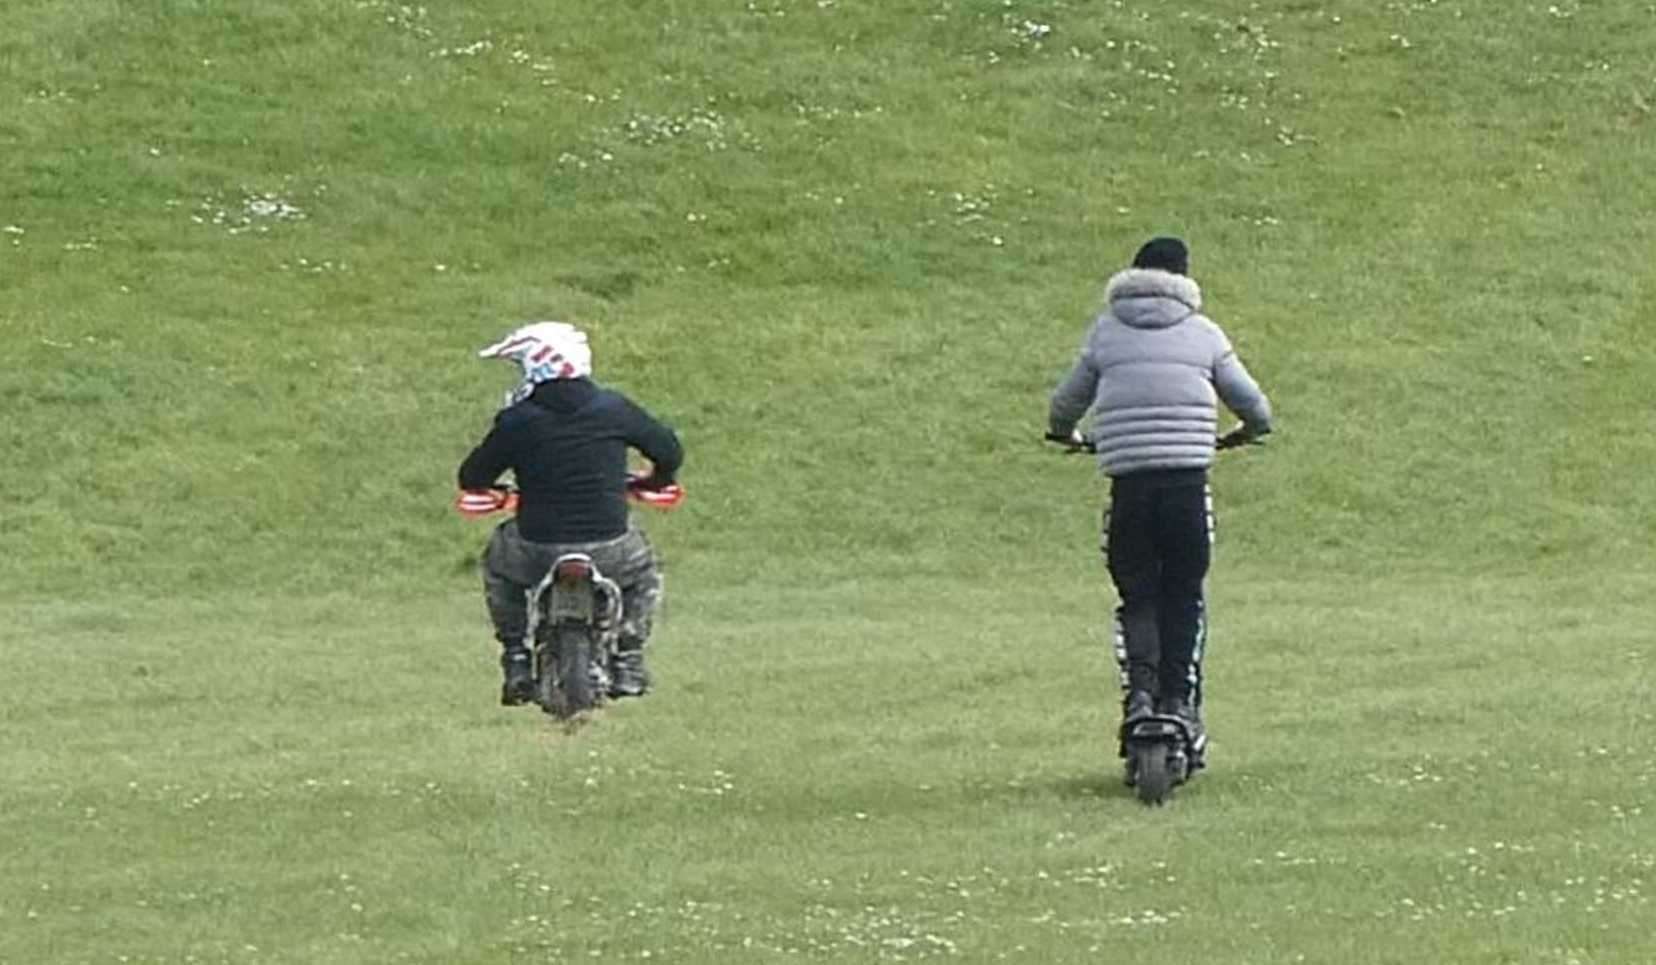 Residents have been complaining to Medway Council for years about nuisance bikers at Barnfield Park. Photo: @BarnfieldBikes